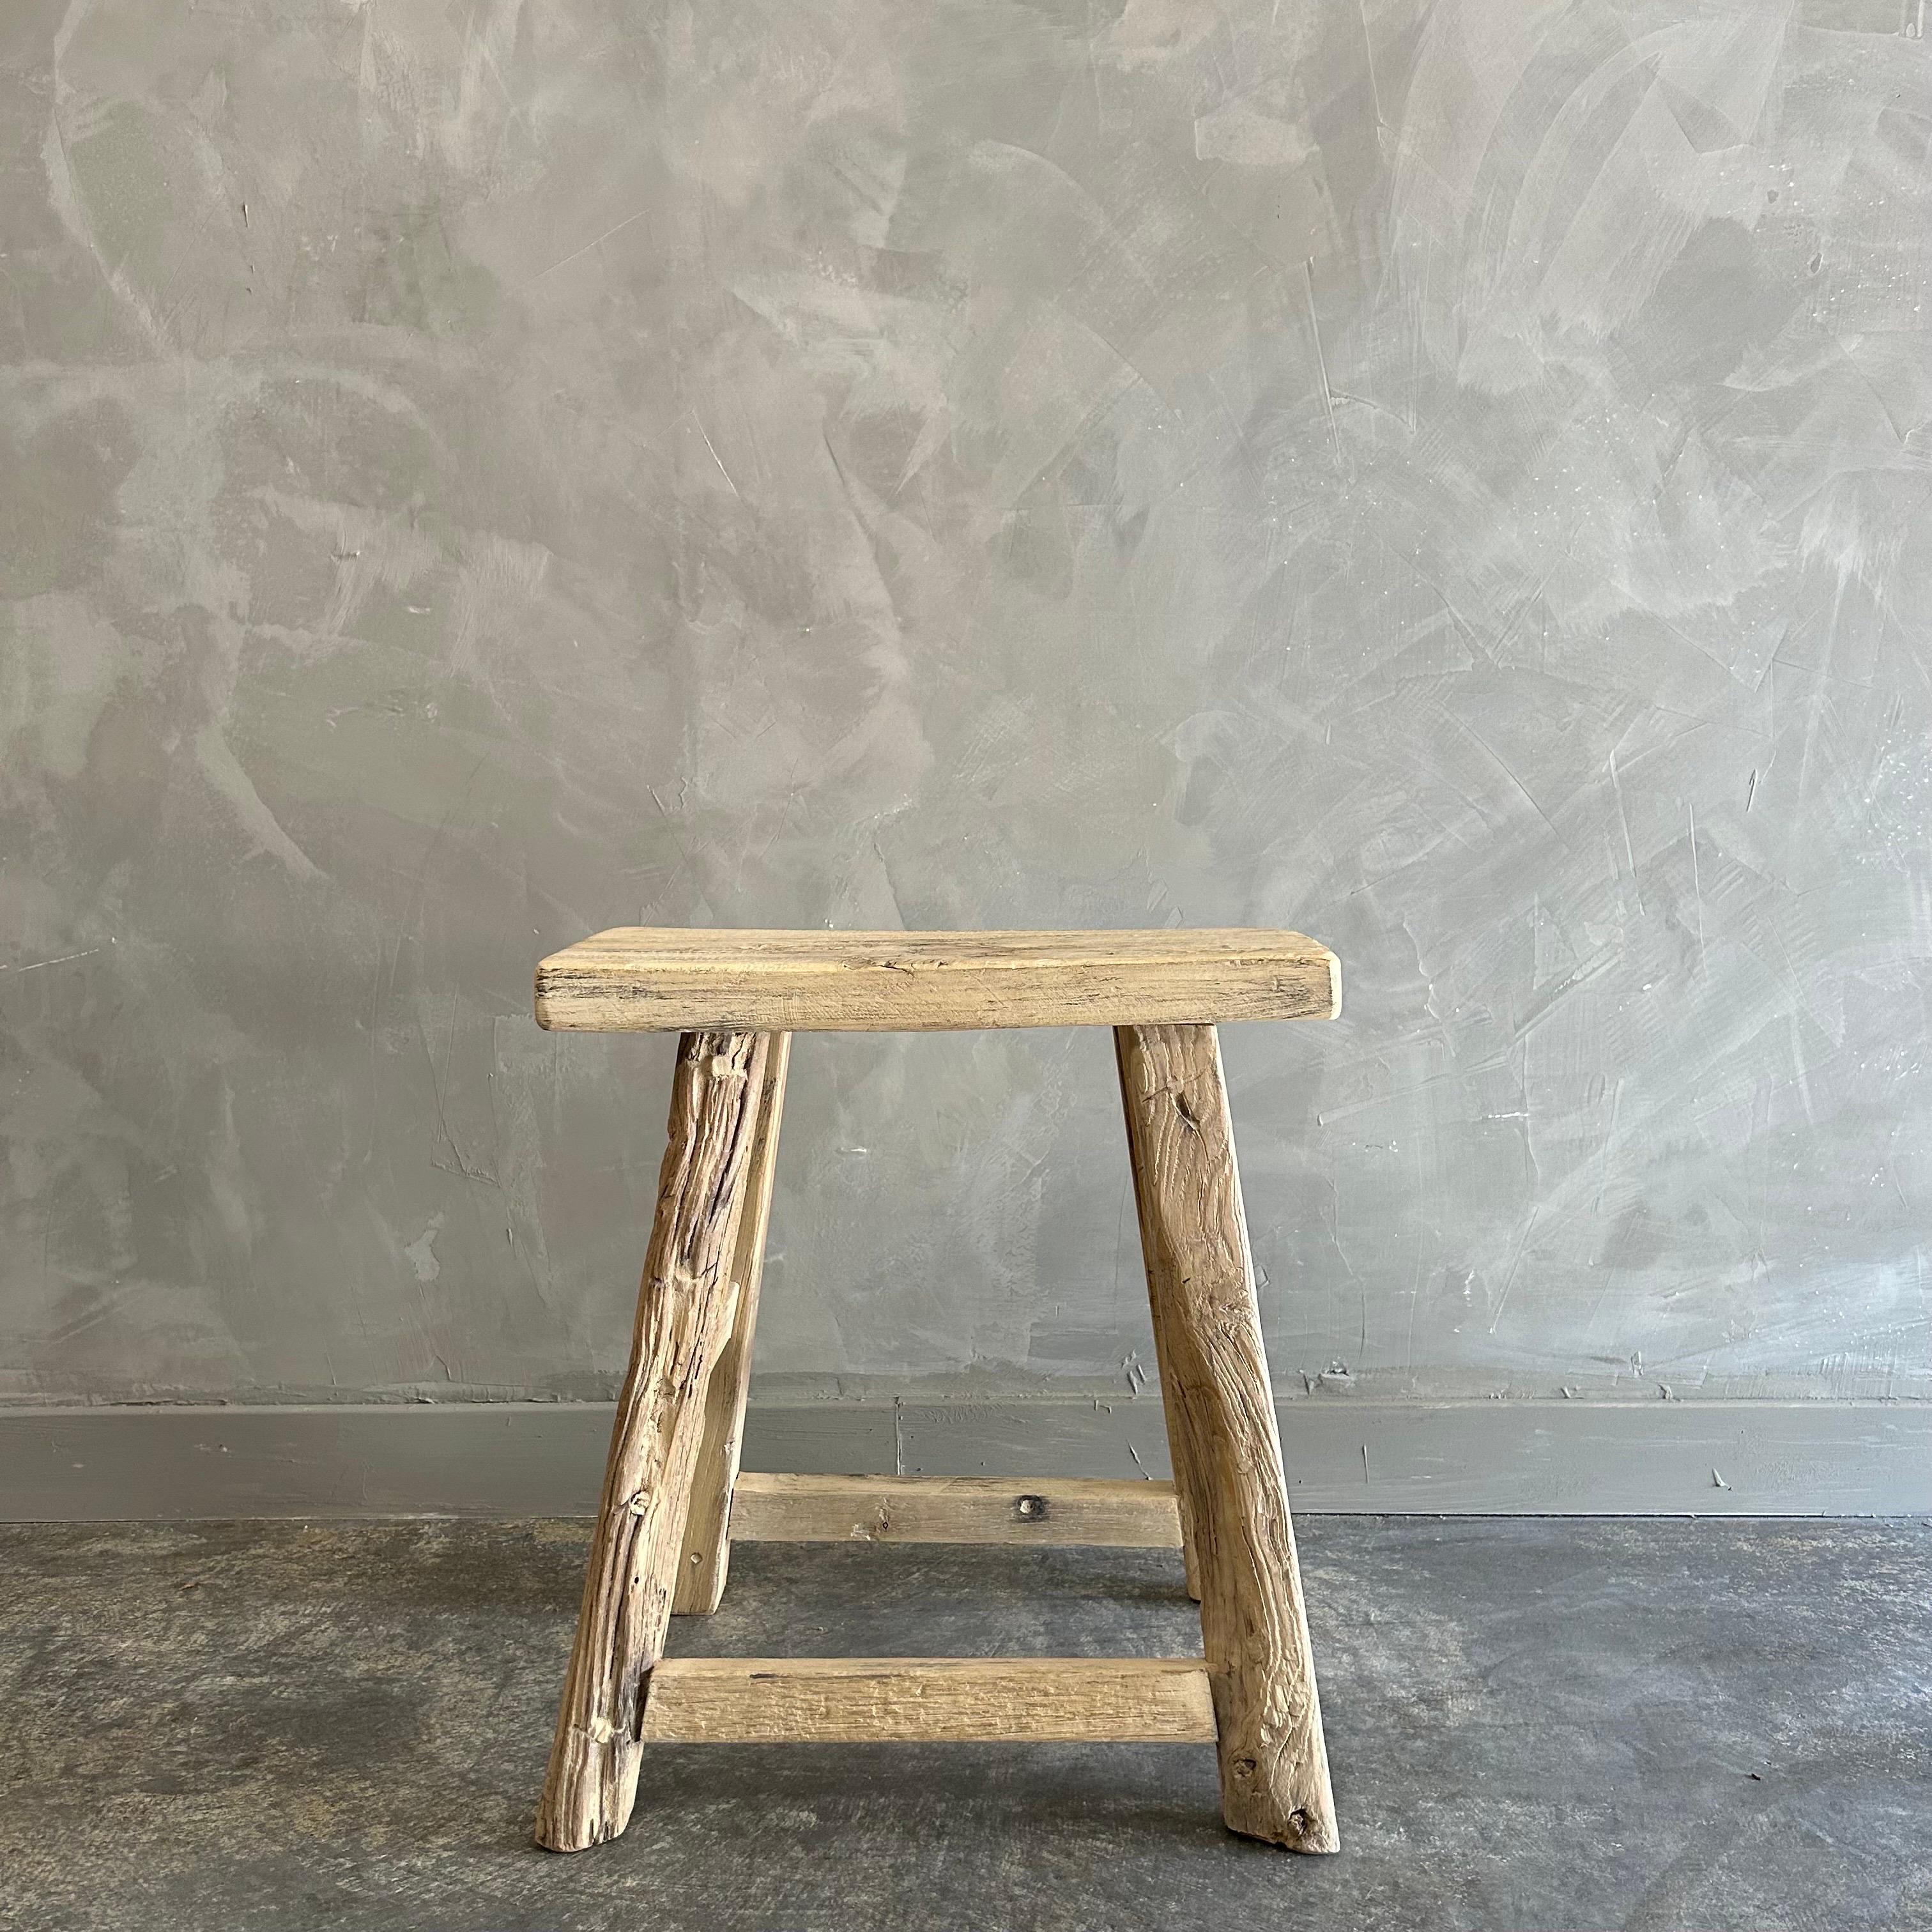 Welcome to bloomhomeinc we stock over 2000 items, please scroll down and click view sellers other items to see more!
Size:  18”w x 14”d x 19”h
SD:9”
Vintage Antique Elm Wood stool made from vintage reclaimed elm wood. Beautiful antique patina, with